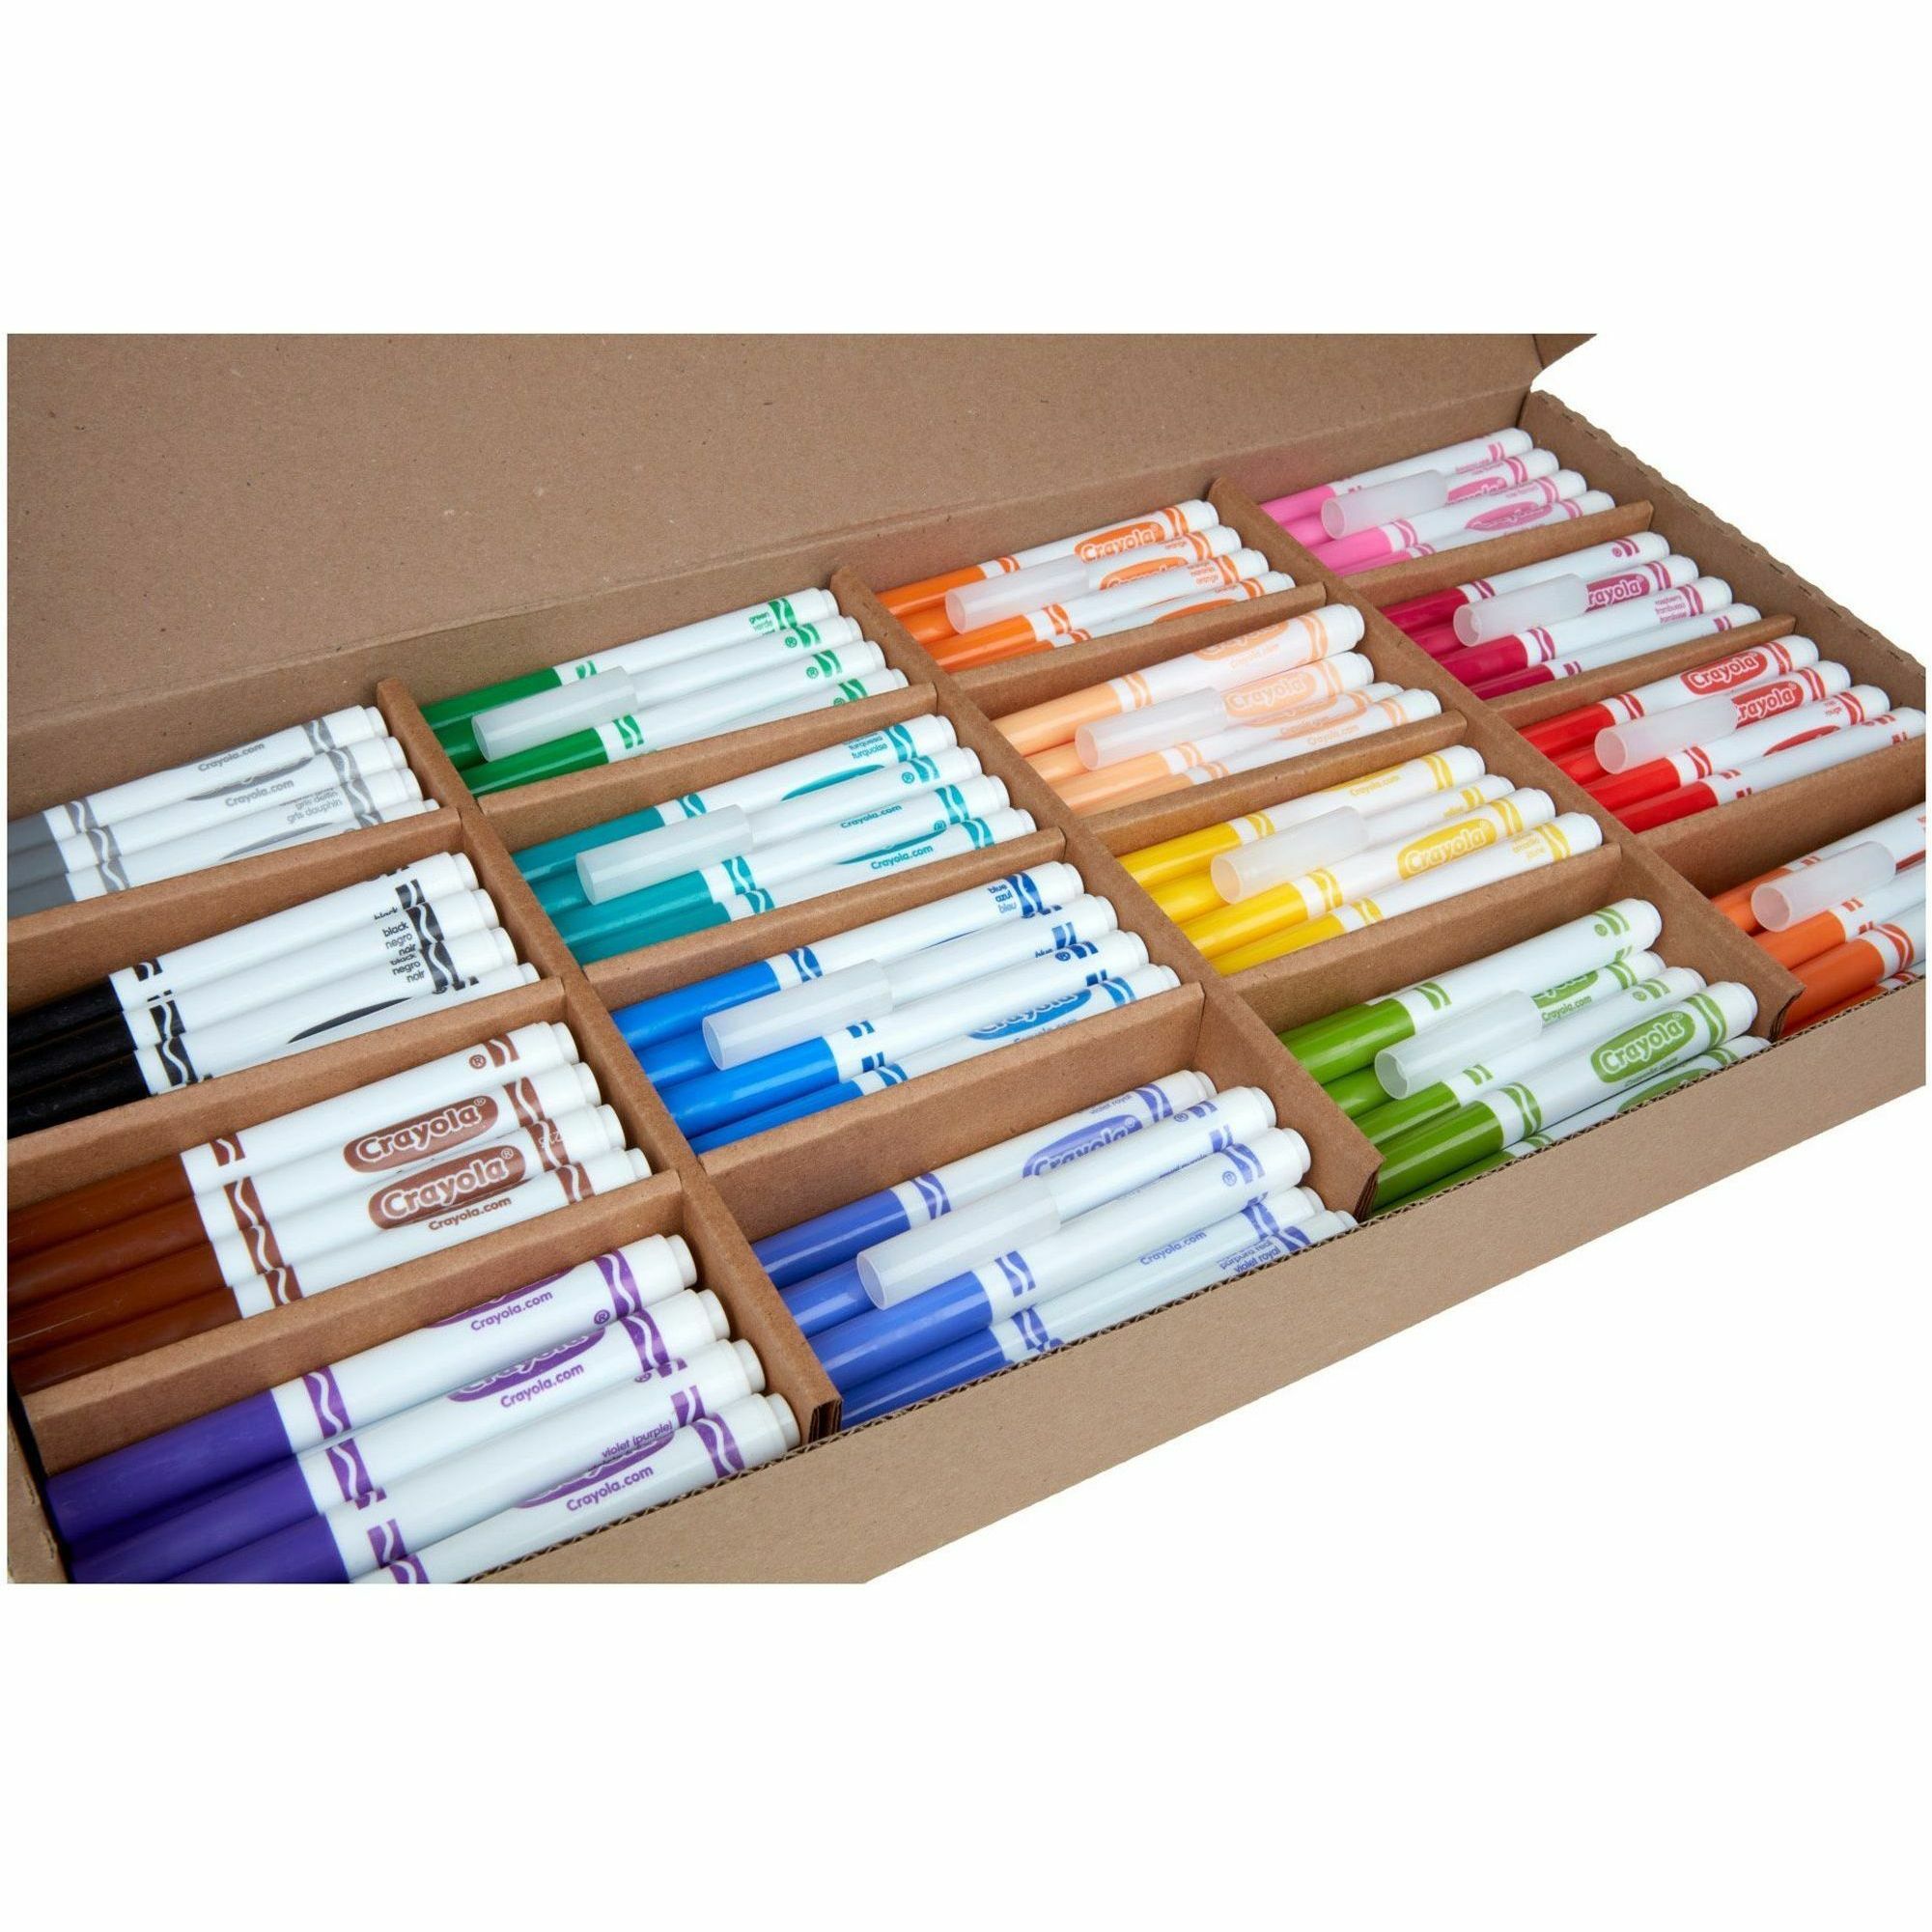  Crayola Non-Toxic Washable Marker And Large Crayon  Drawing Classroom Pack, Assorted Colors, 256 Pieces, Pack Of 256 :  Learning: Supplies